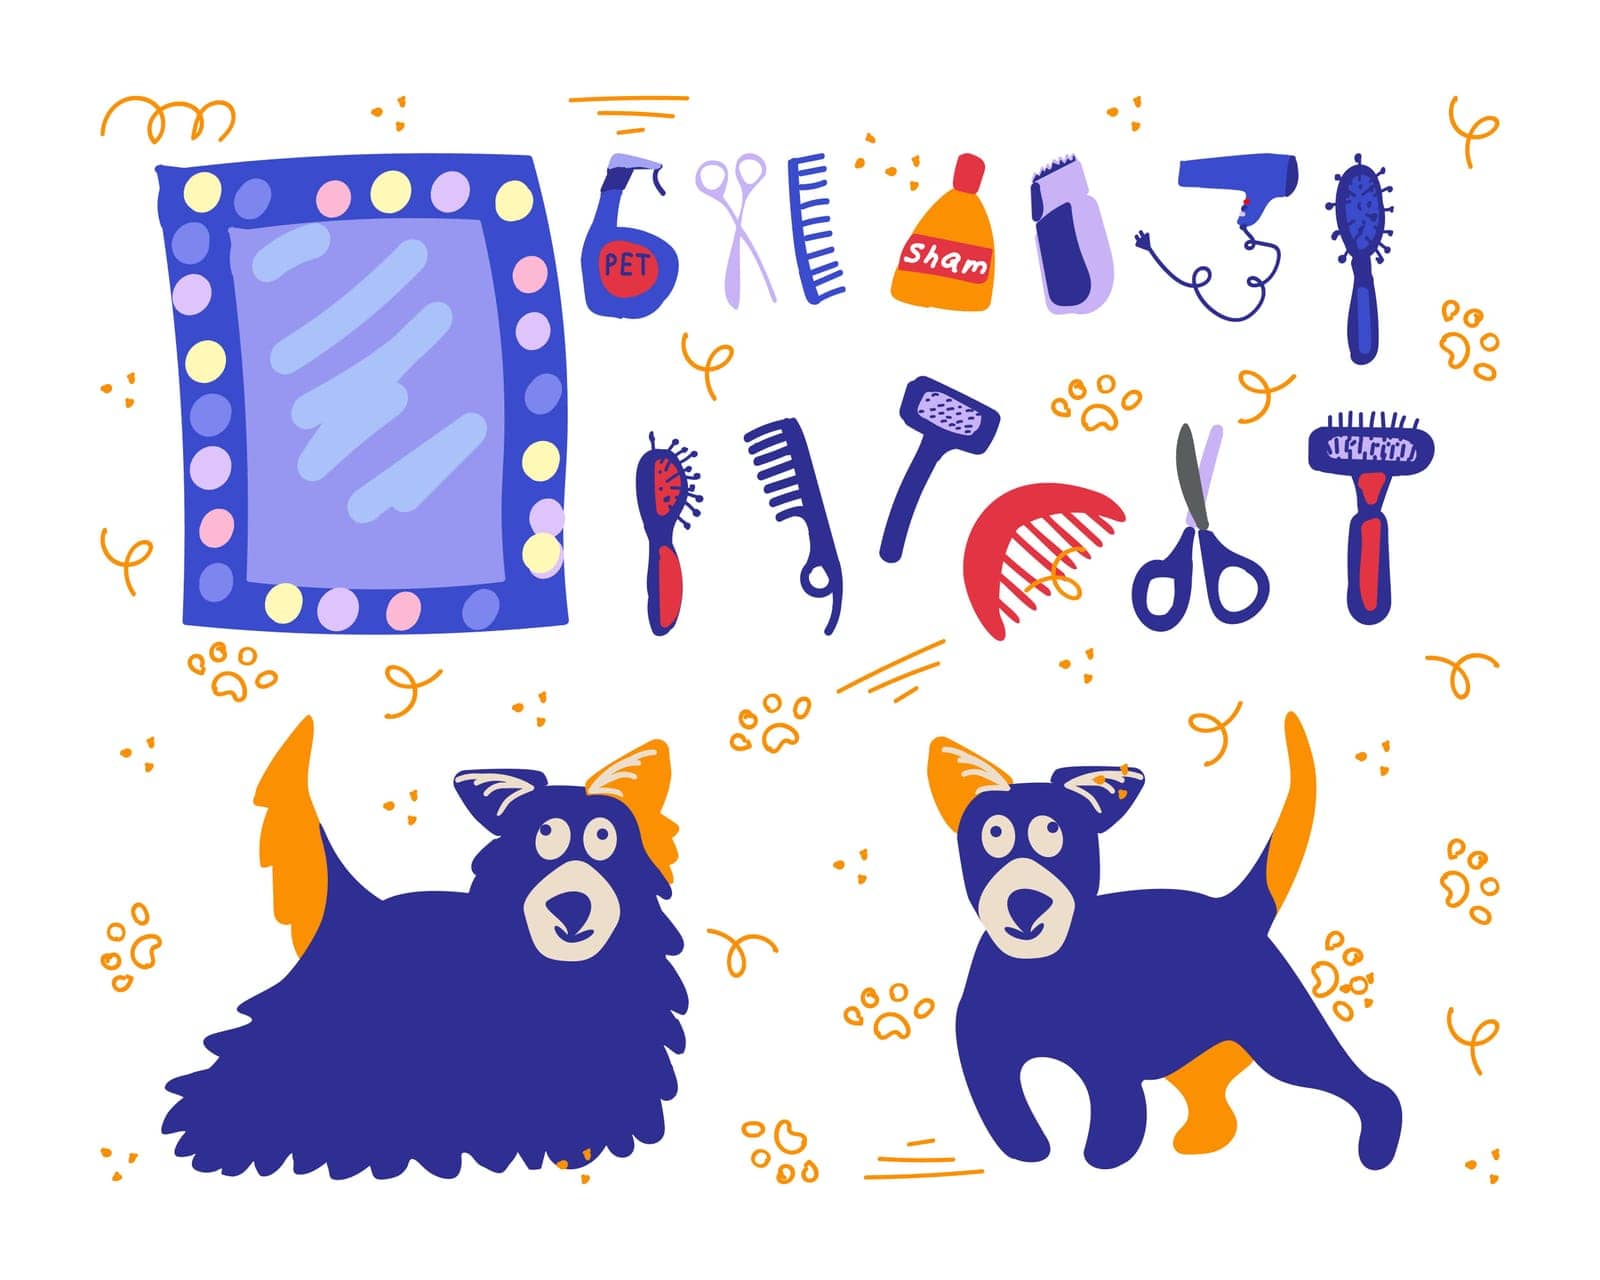 Pet grooming. Dog salon design with several grooming tools. Vector illustration made by hand in doodle style.